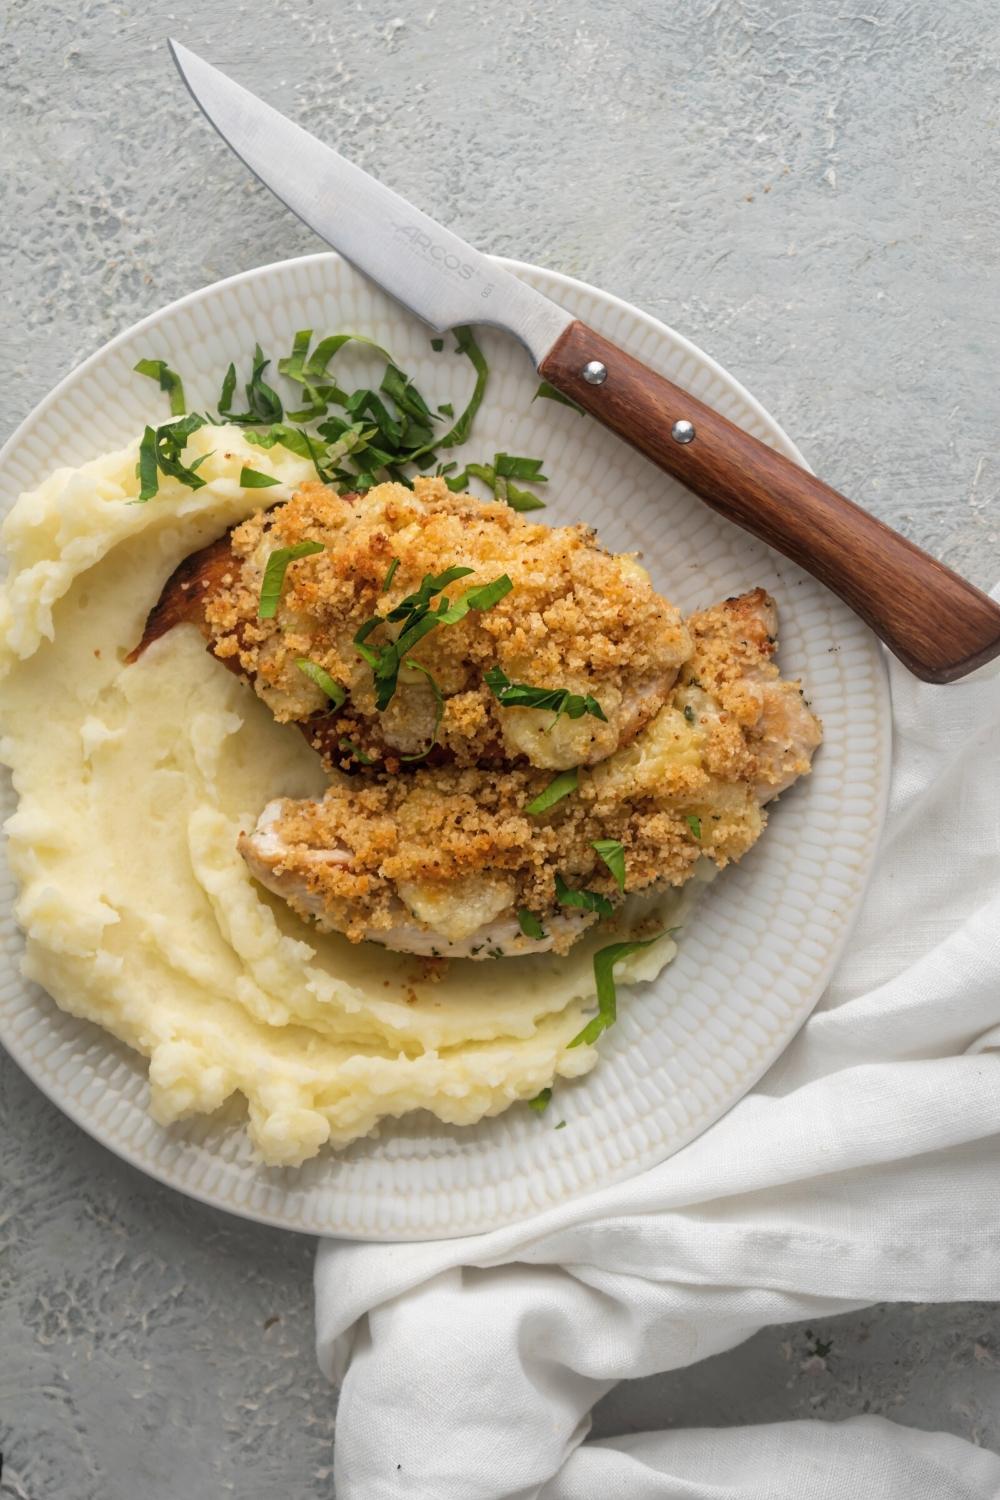 Two parmesan crusted chicken breasts on top of one another next to mashed potatoes all on a white plate.